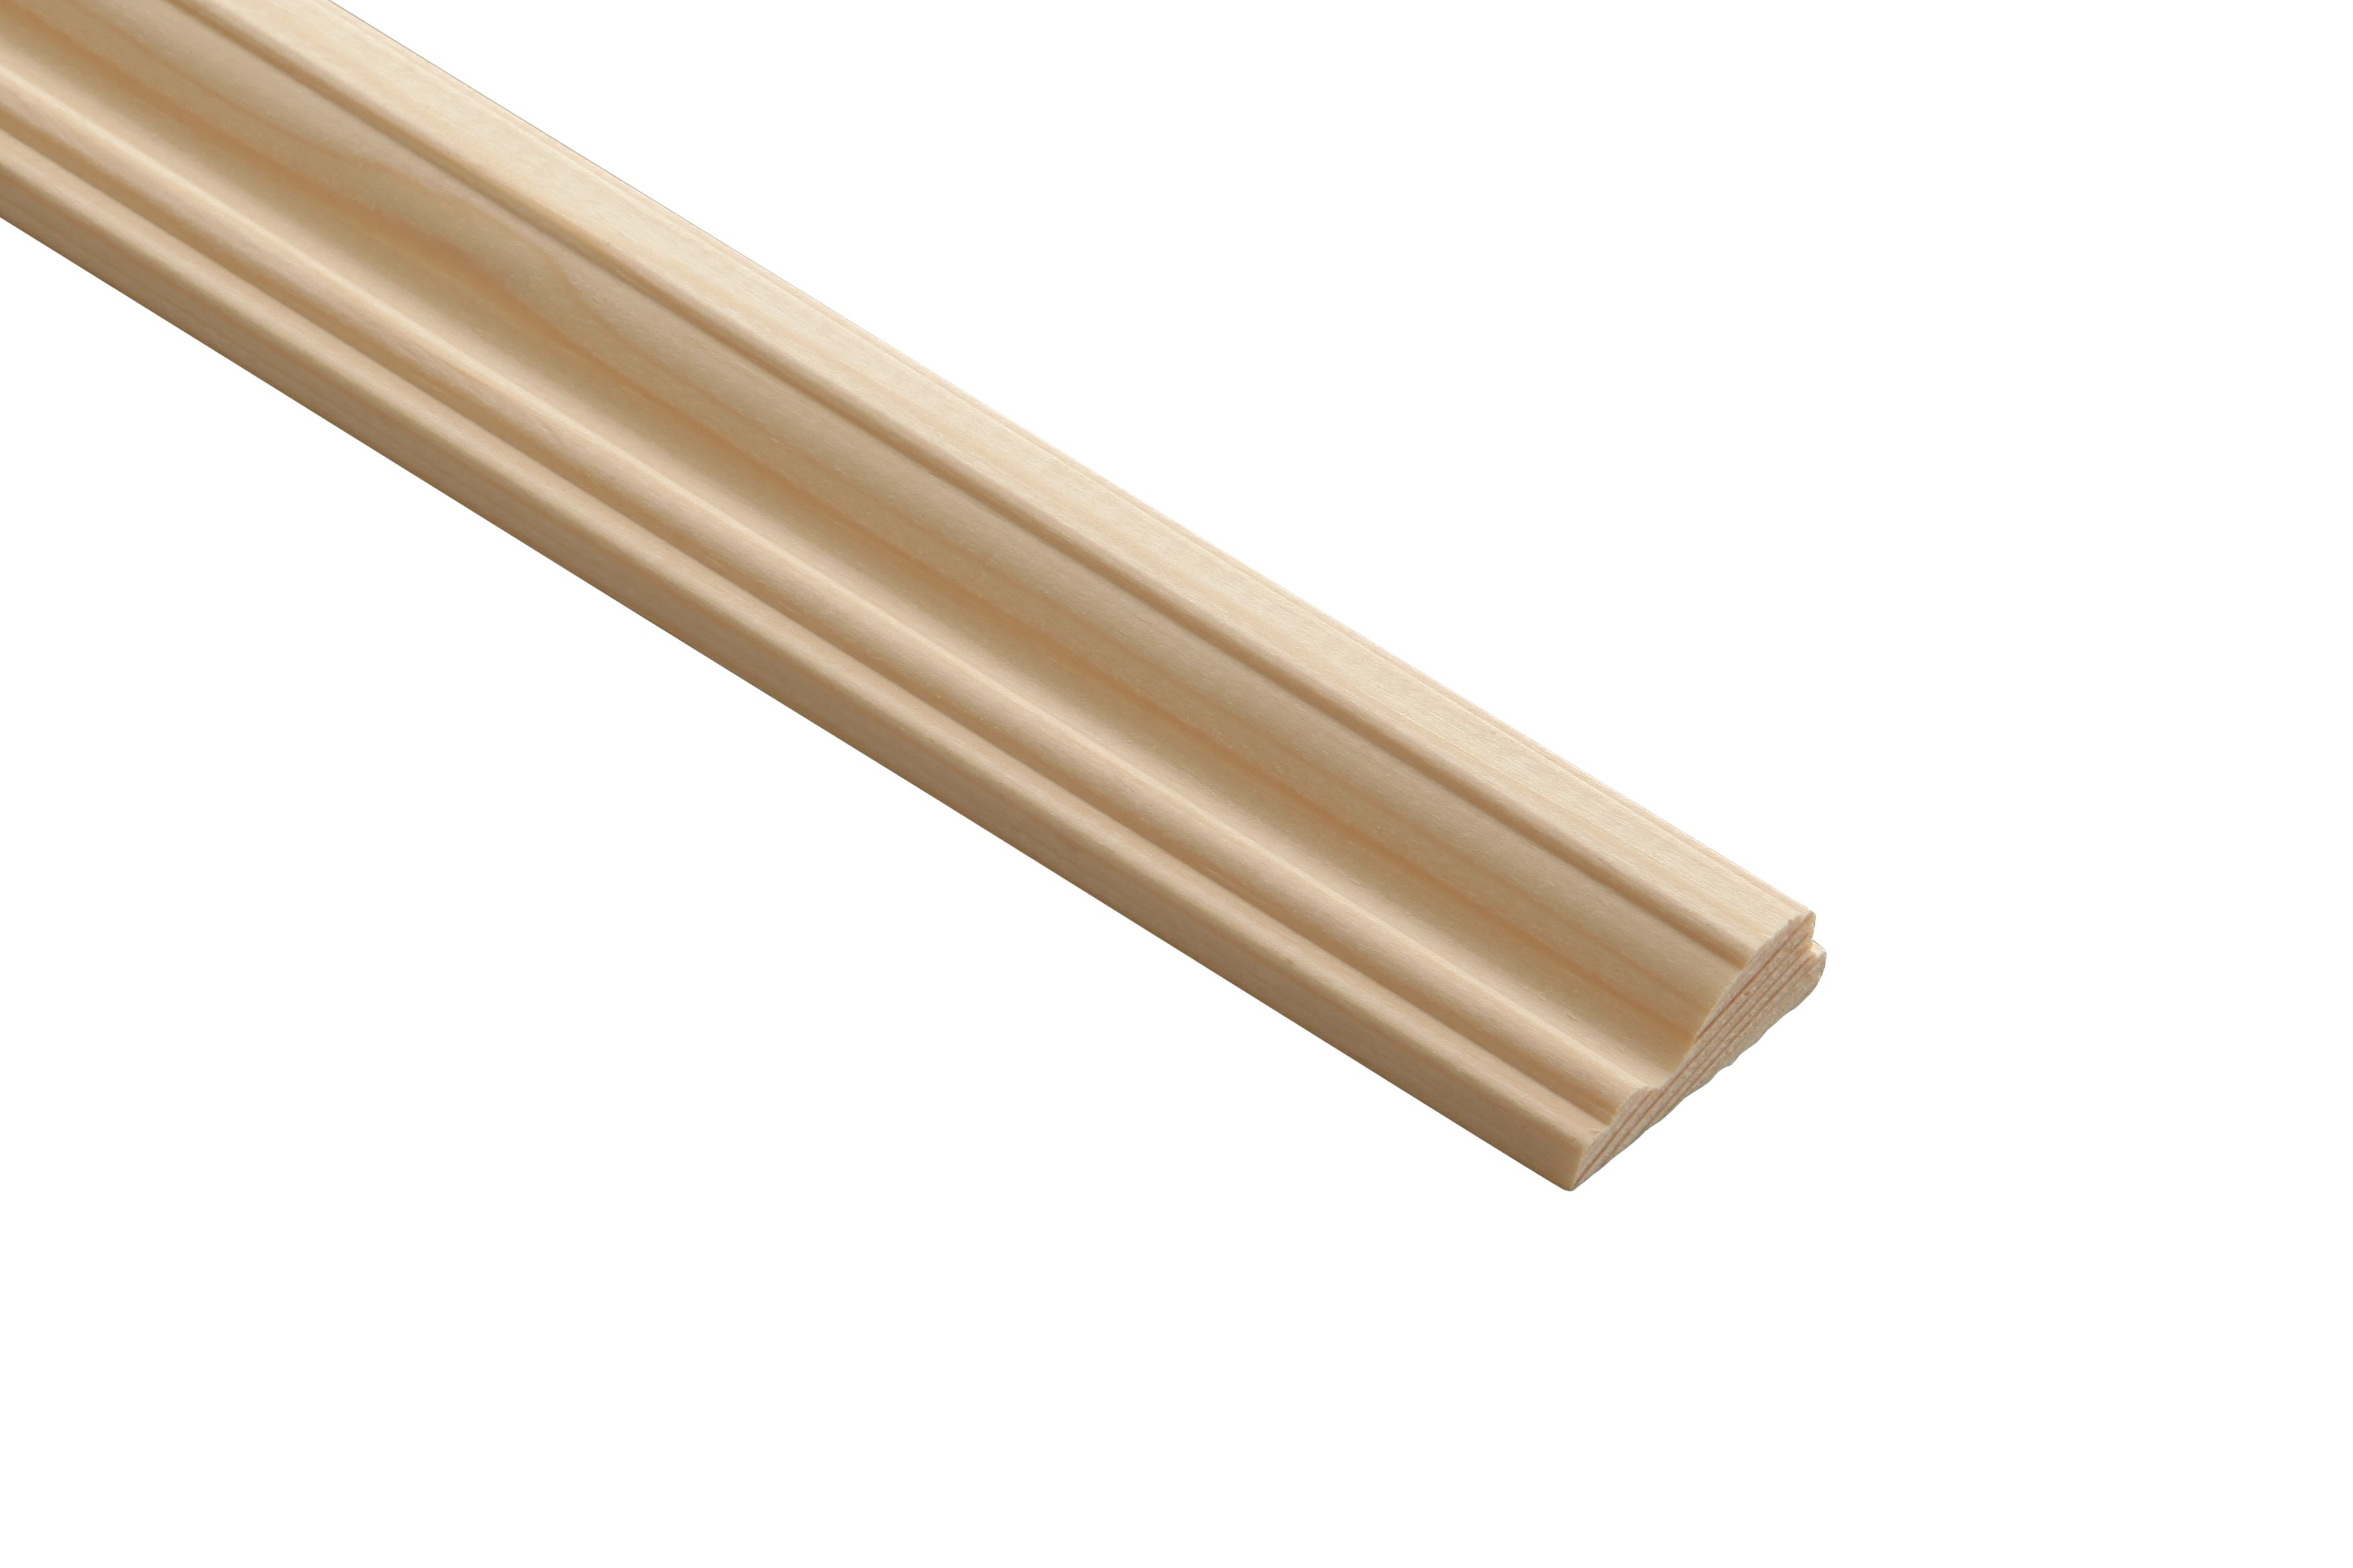 Wickes Pine Decorative Cover Moulding - 12 x 32 x 2400mm